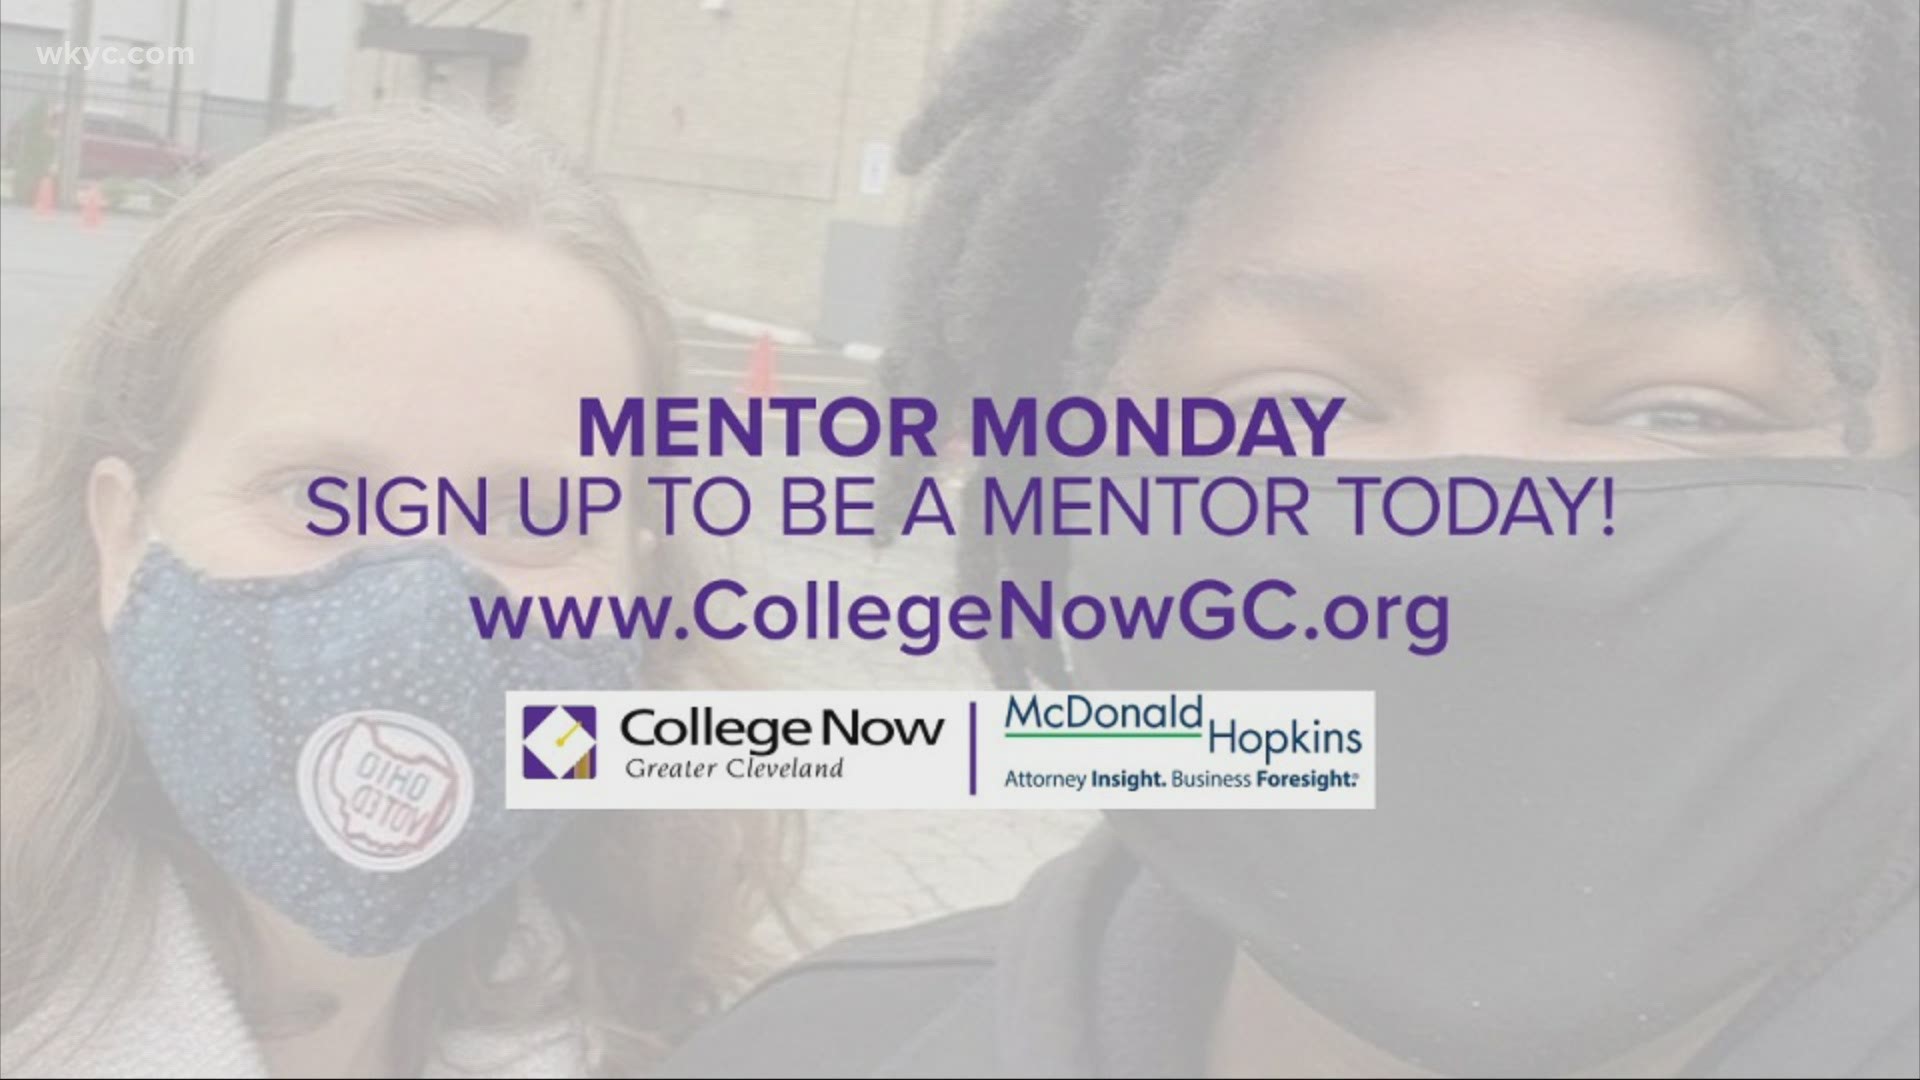 This was WKYC's third year leading this campaign along with College Now Greater Cleveland. It's your chance to sign up to be a mentor to a college-bound student.